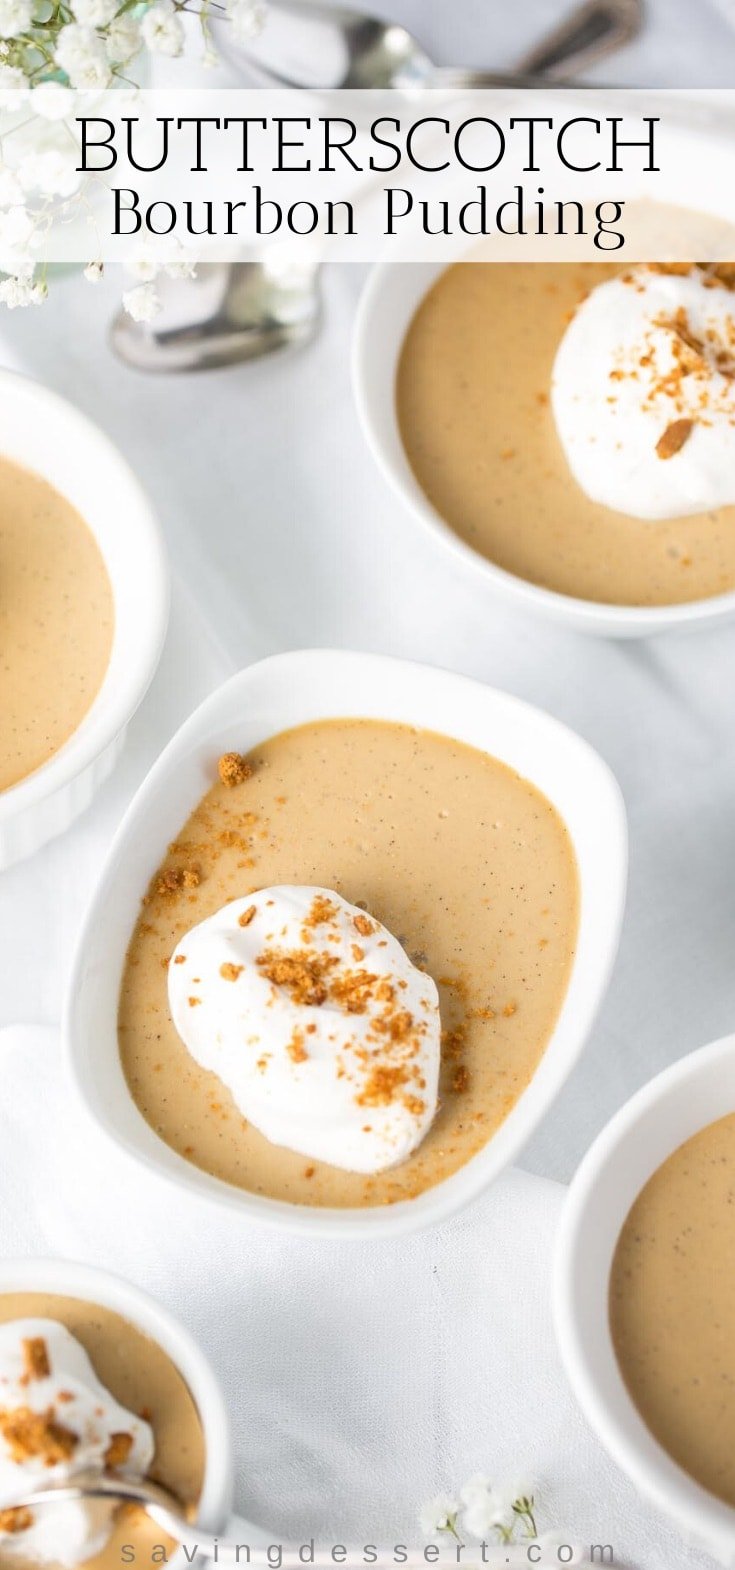 Individual bowls of butterscotch pudding topped with whipped cream and crushed gingersnaps